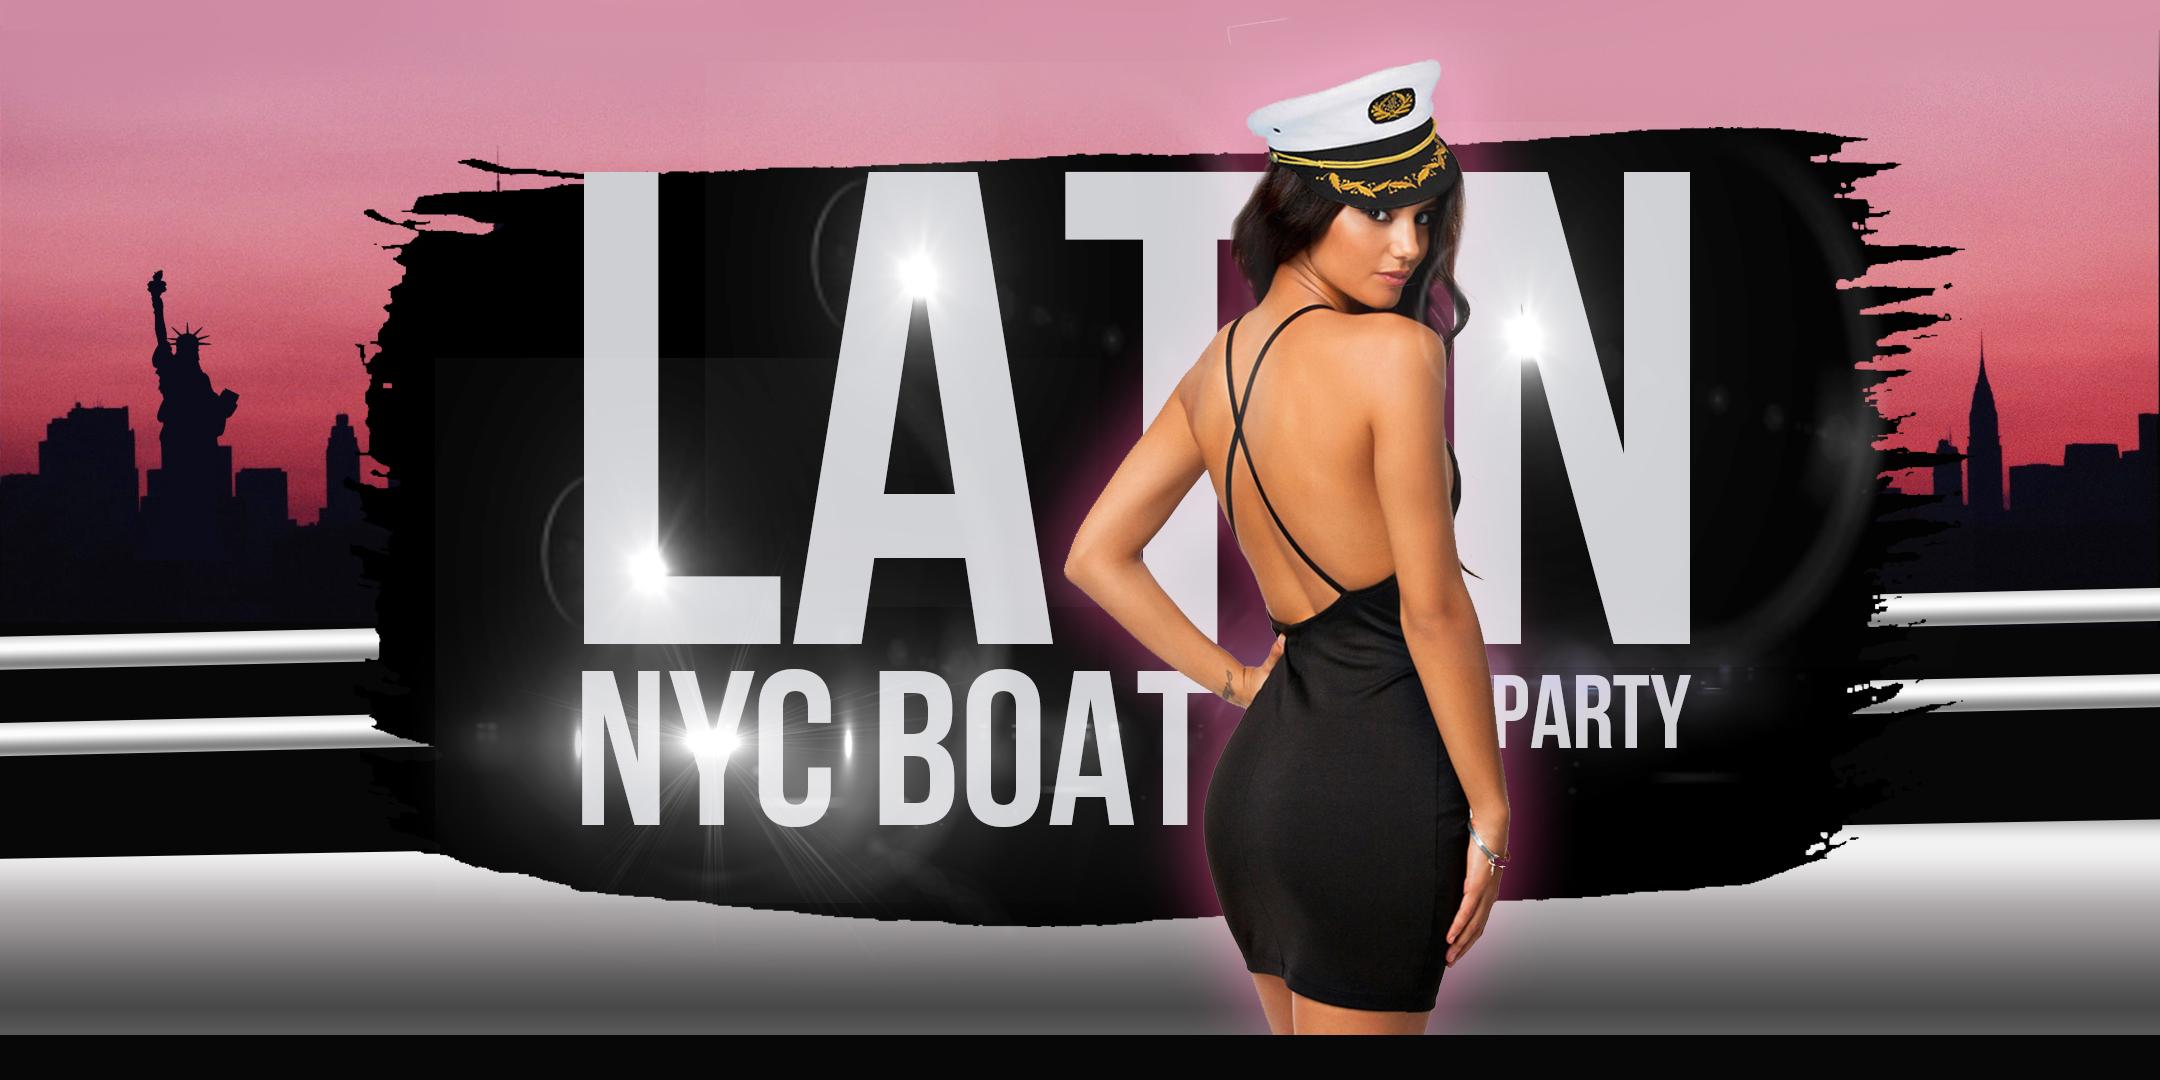 Latin Boat Party Yacht Cruise: Saturday Night Skyline + Statue of Liberty in New York City